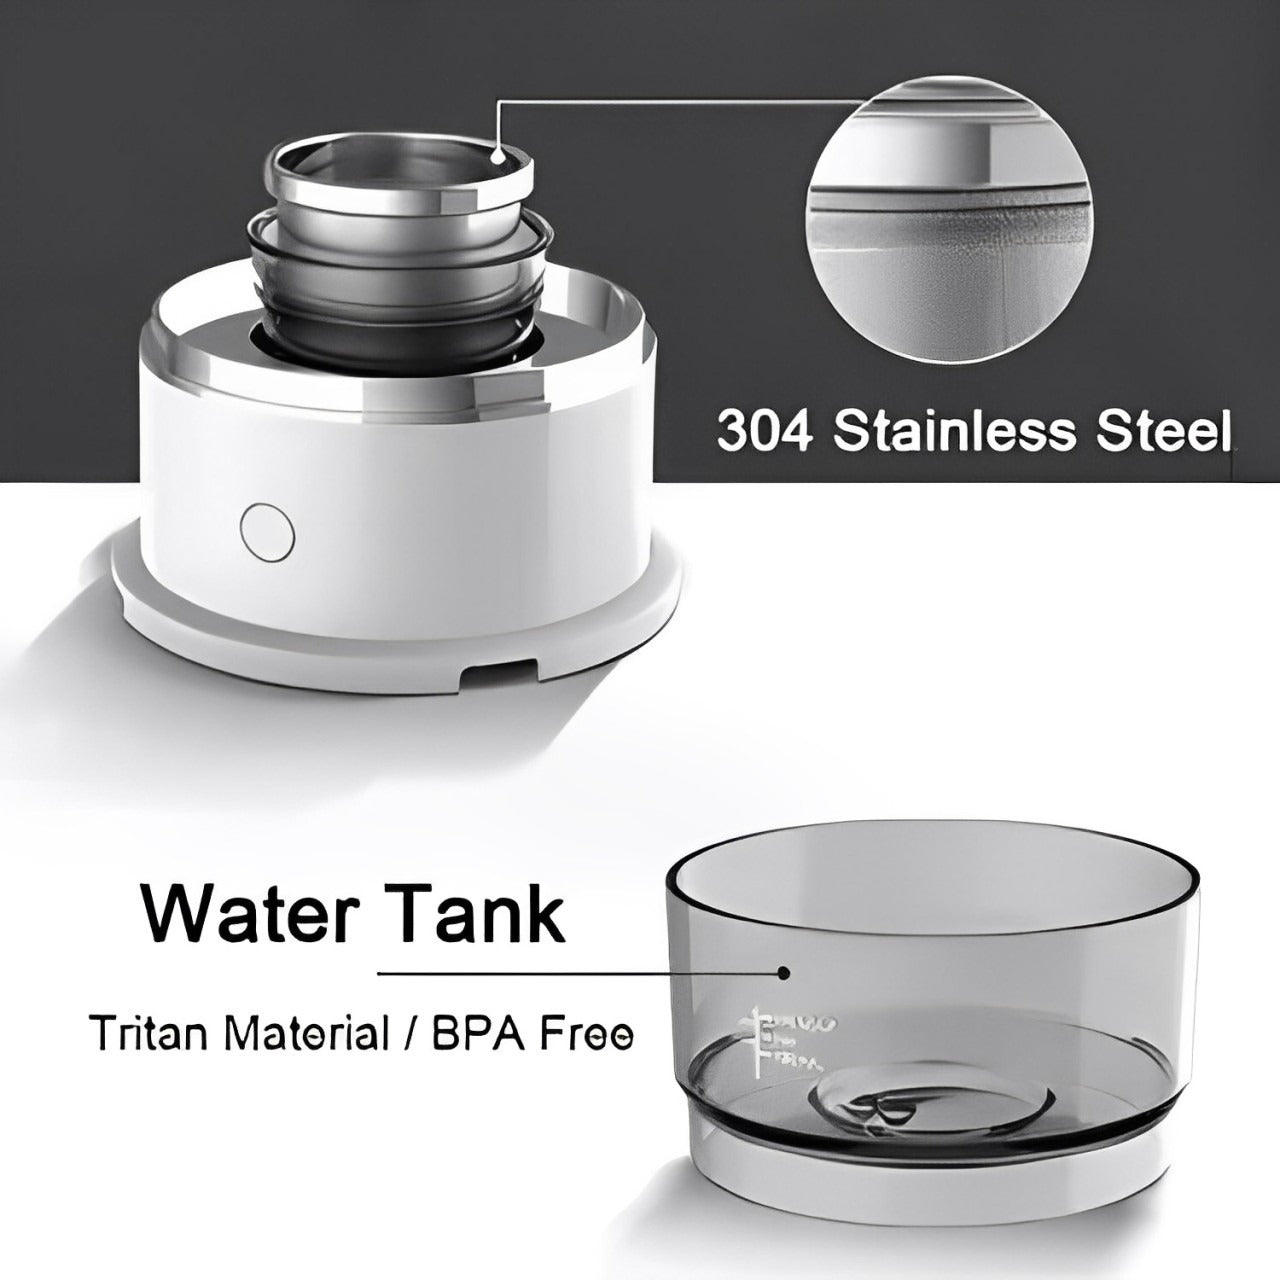 stainless steel and water tank of coffee maker